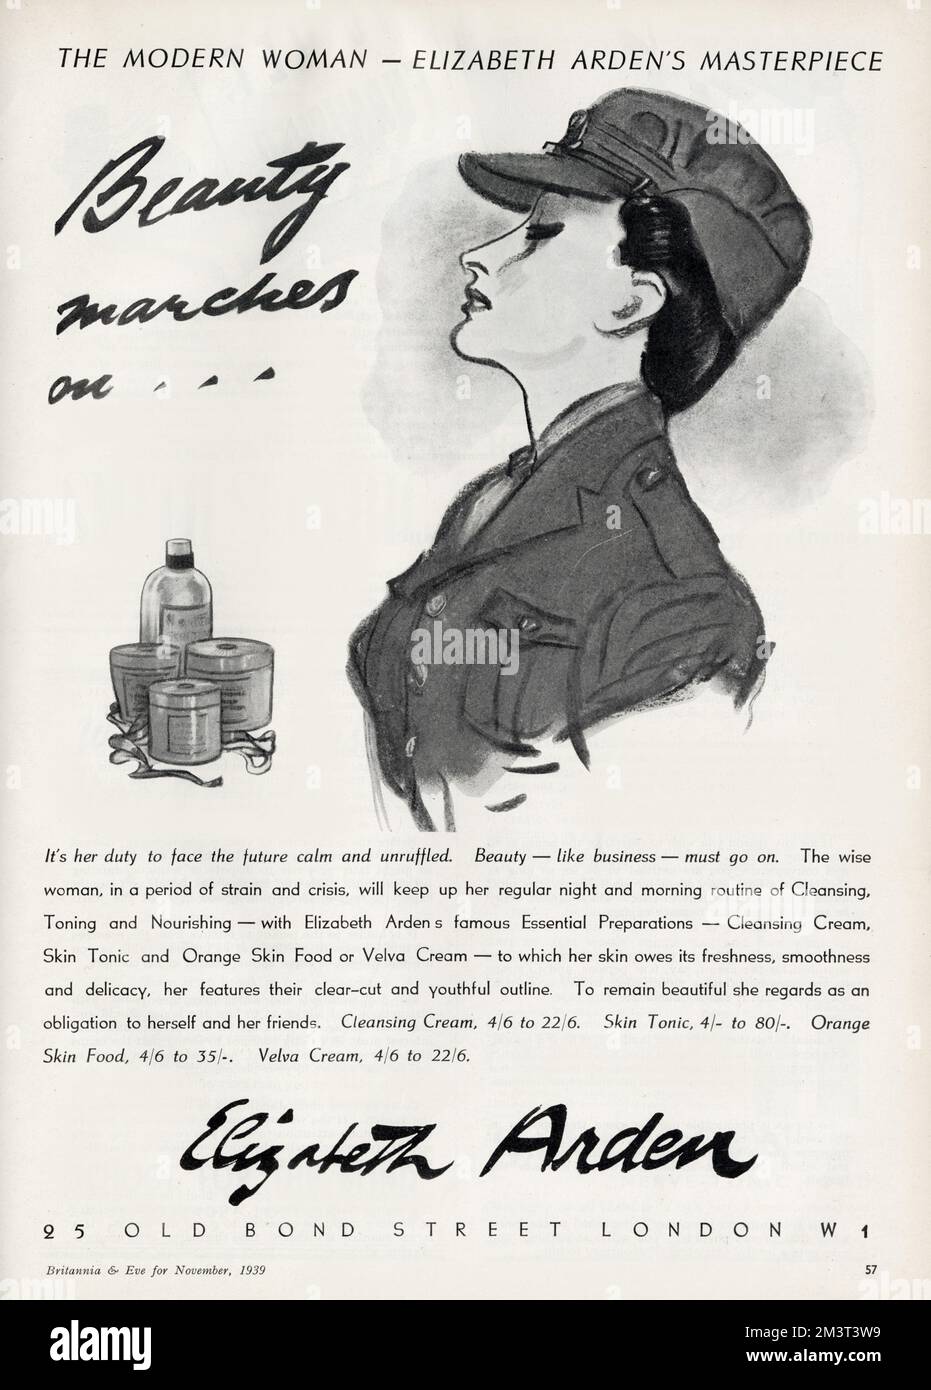 Beauty marches on...  WWII era advertisement for Elizabeth Arden featuring a woman smartly dressed in uniform. 'It's her duty to face the future calm and unruffled. Beauty - like business - must go on.' Stock Photo